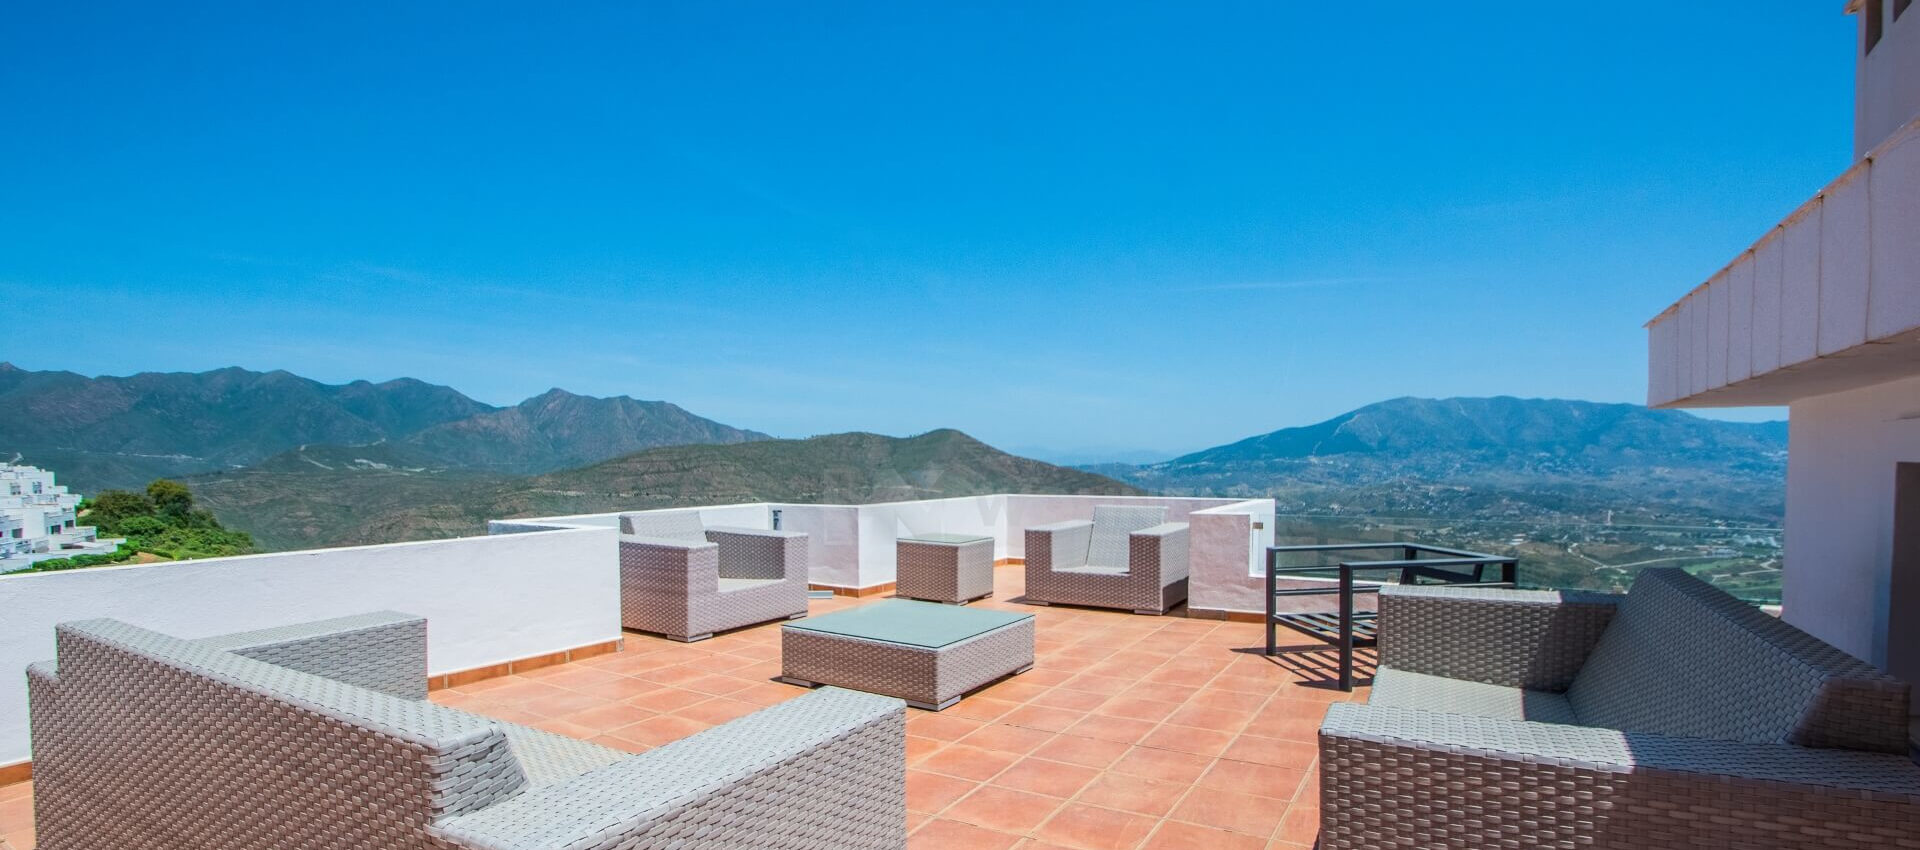 Spacious penthouse with stunning views of the mountains and the sea